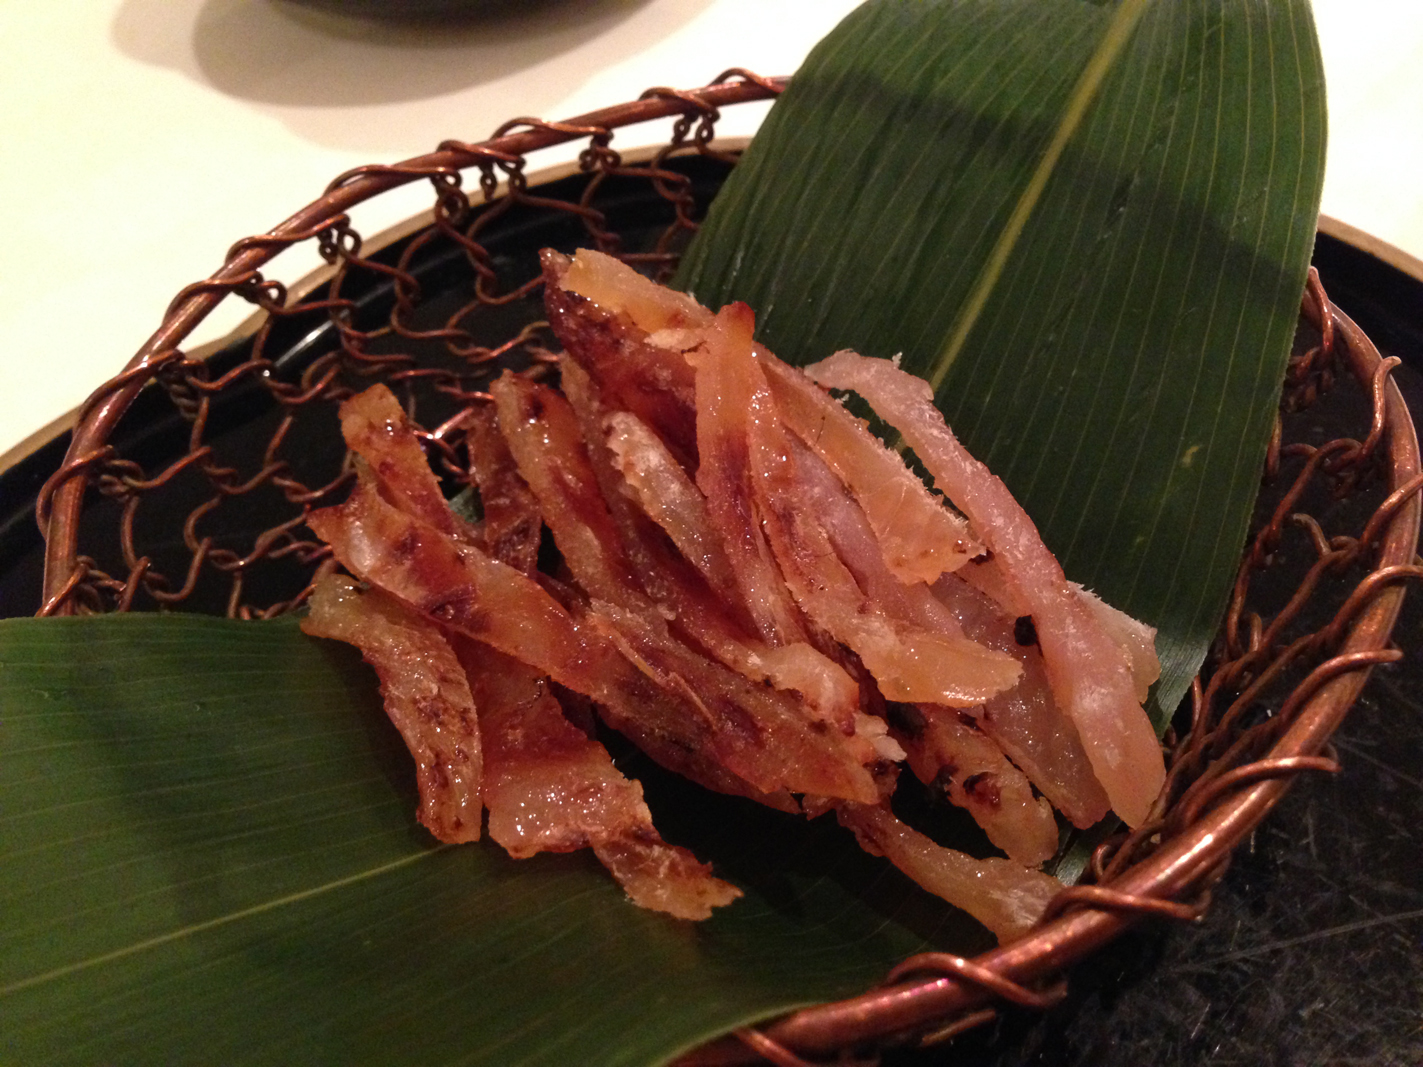 Dried puffer fish jerky - It was really tasty! Couldn't get enough of it!